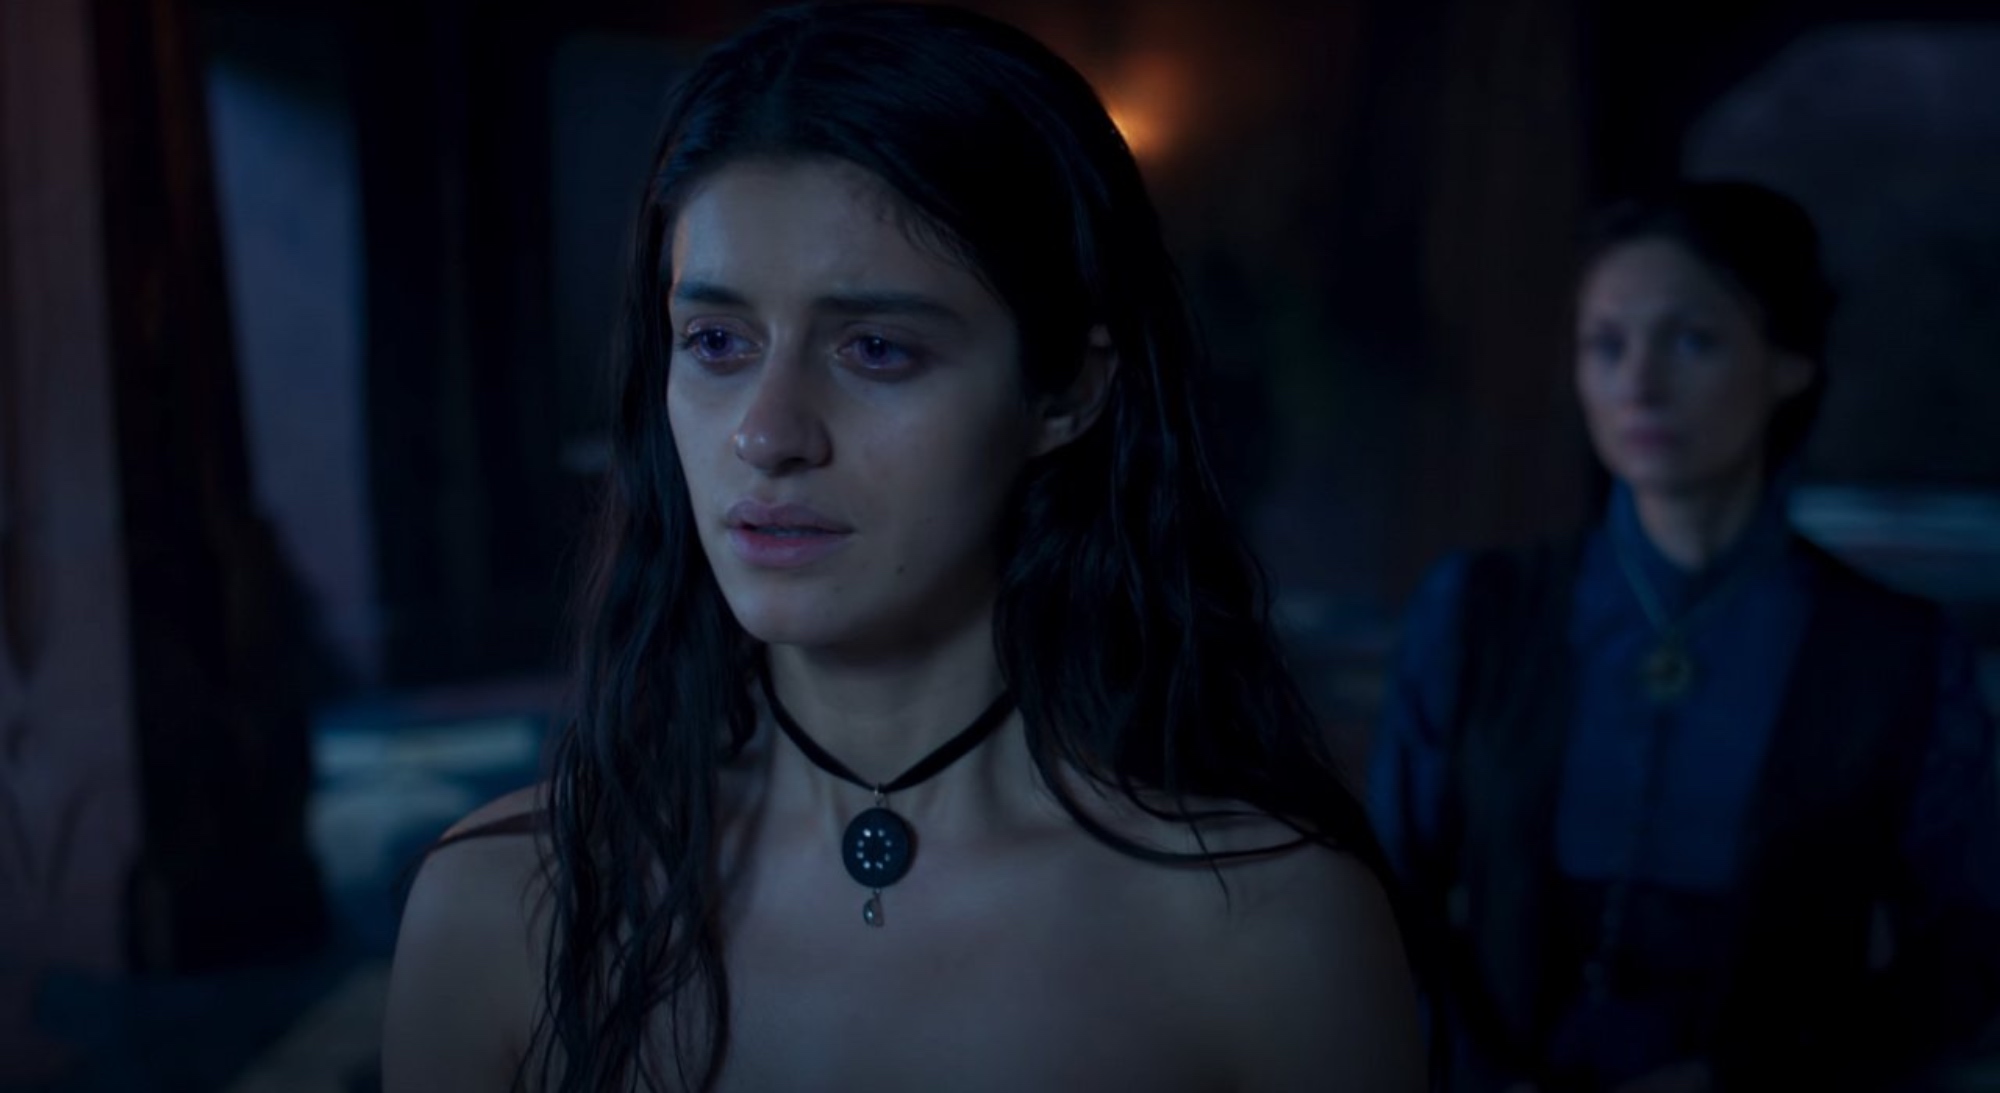 Yennefer and Tissaia in 'The Witcher' Season 2 in a dark room crying.